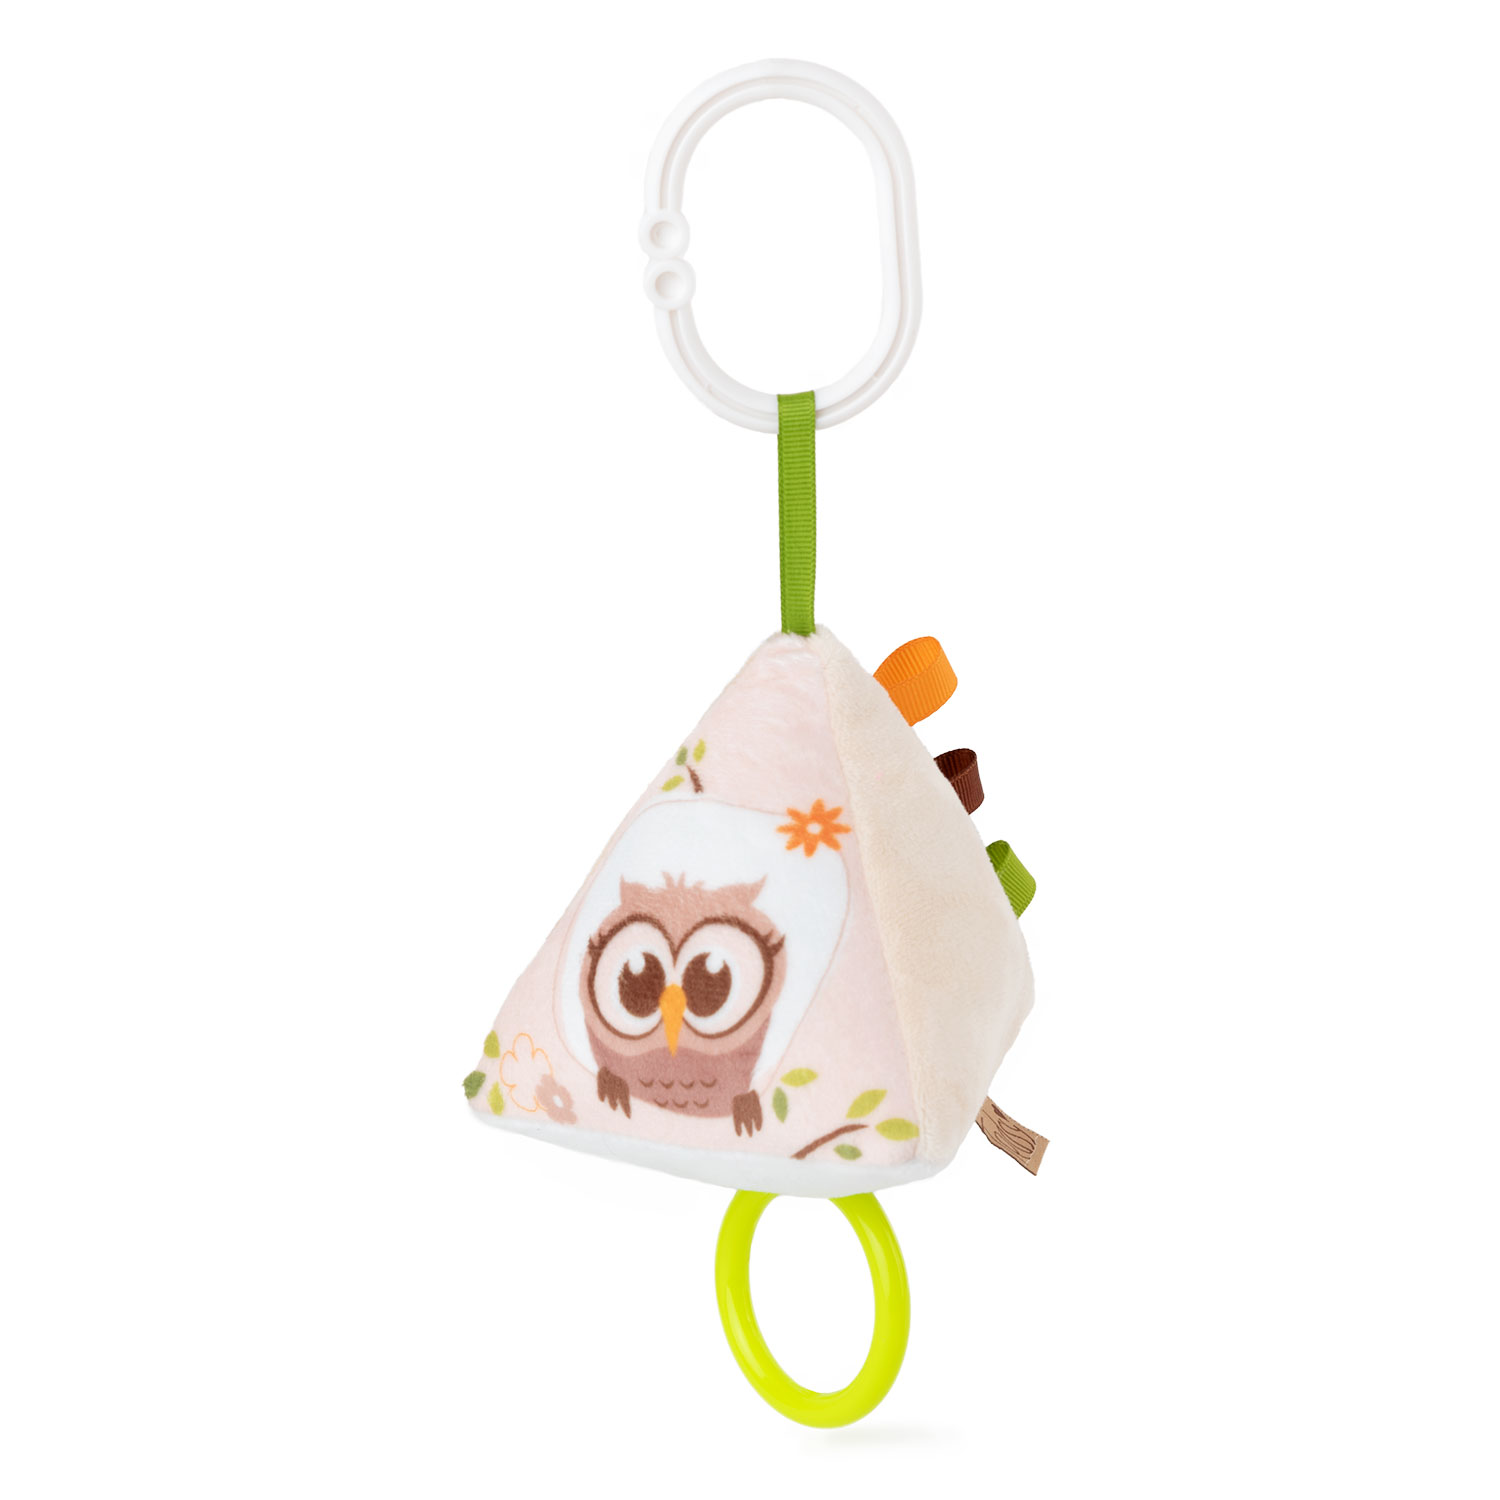 Baby Musical toy pyramid - Owl